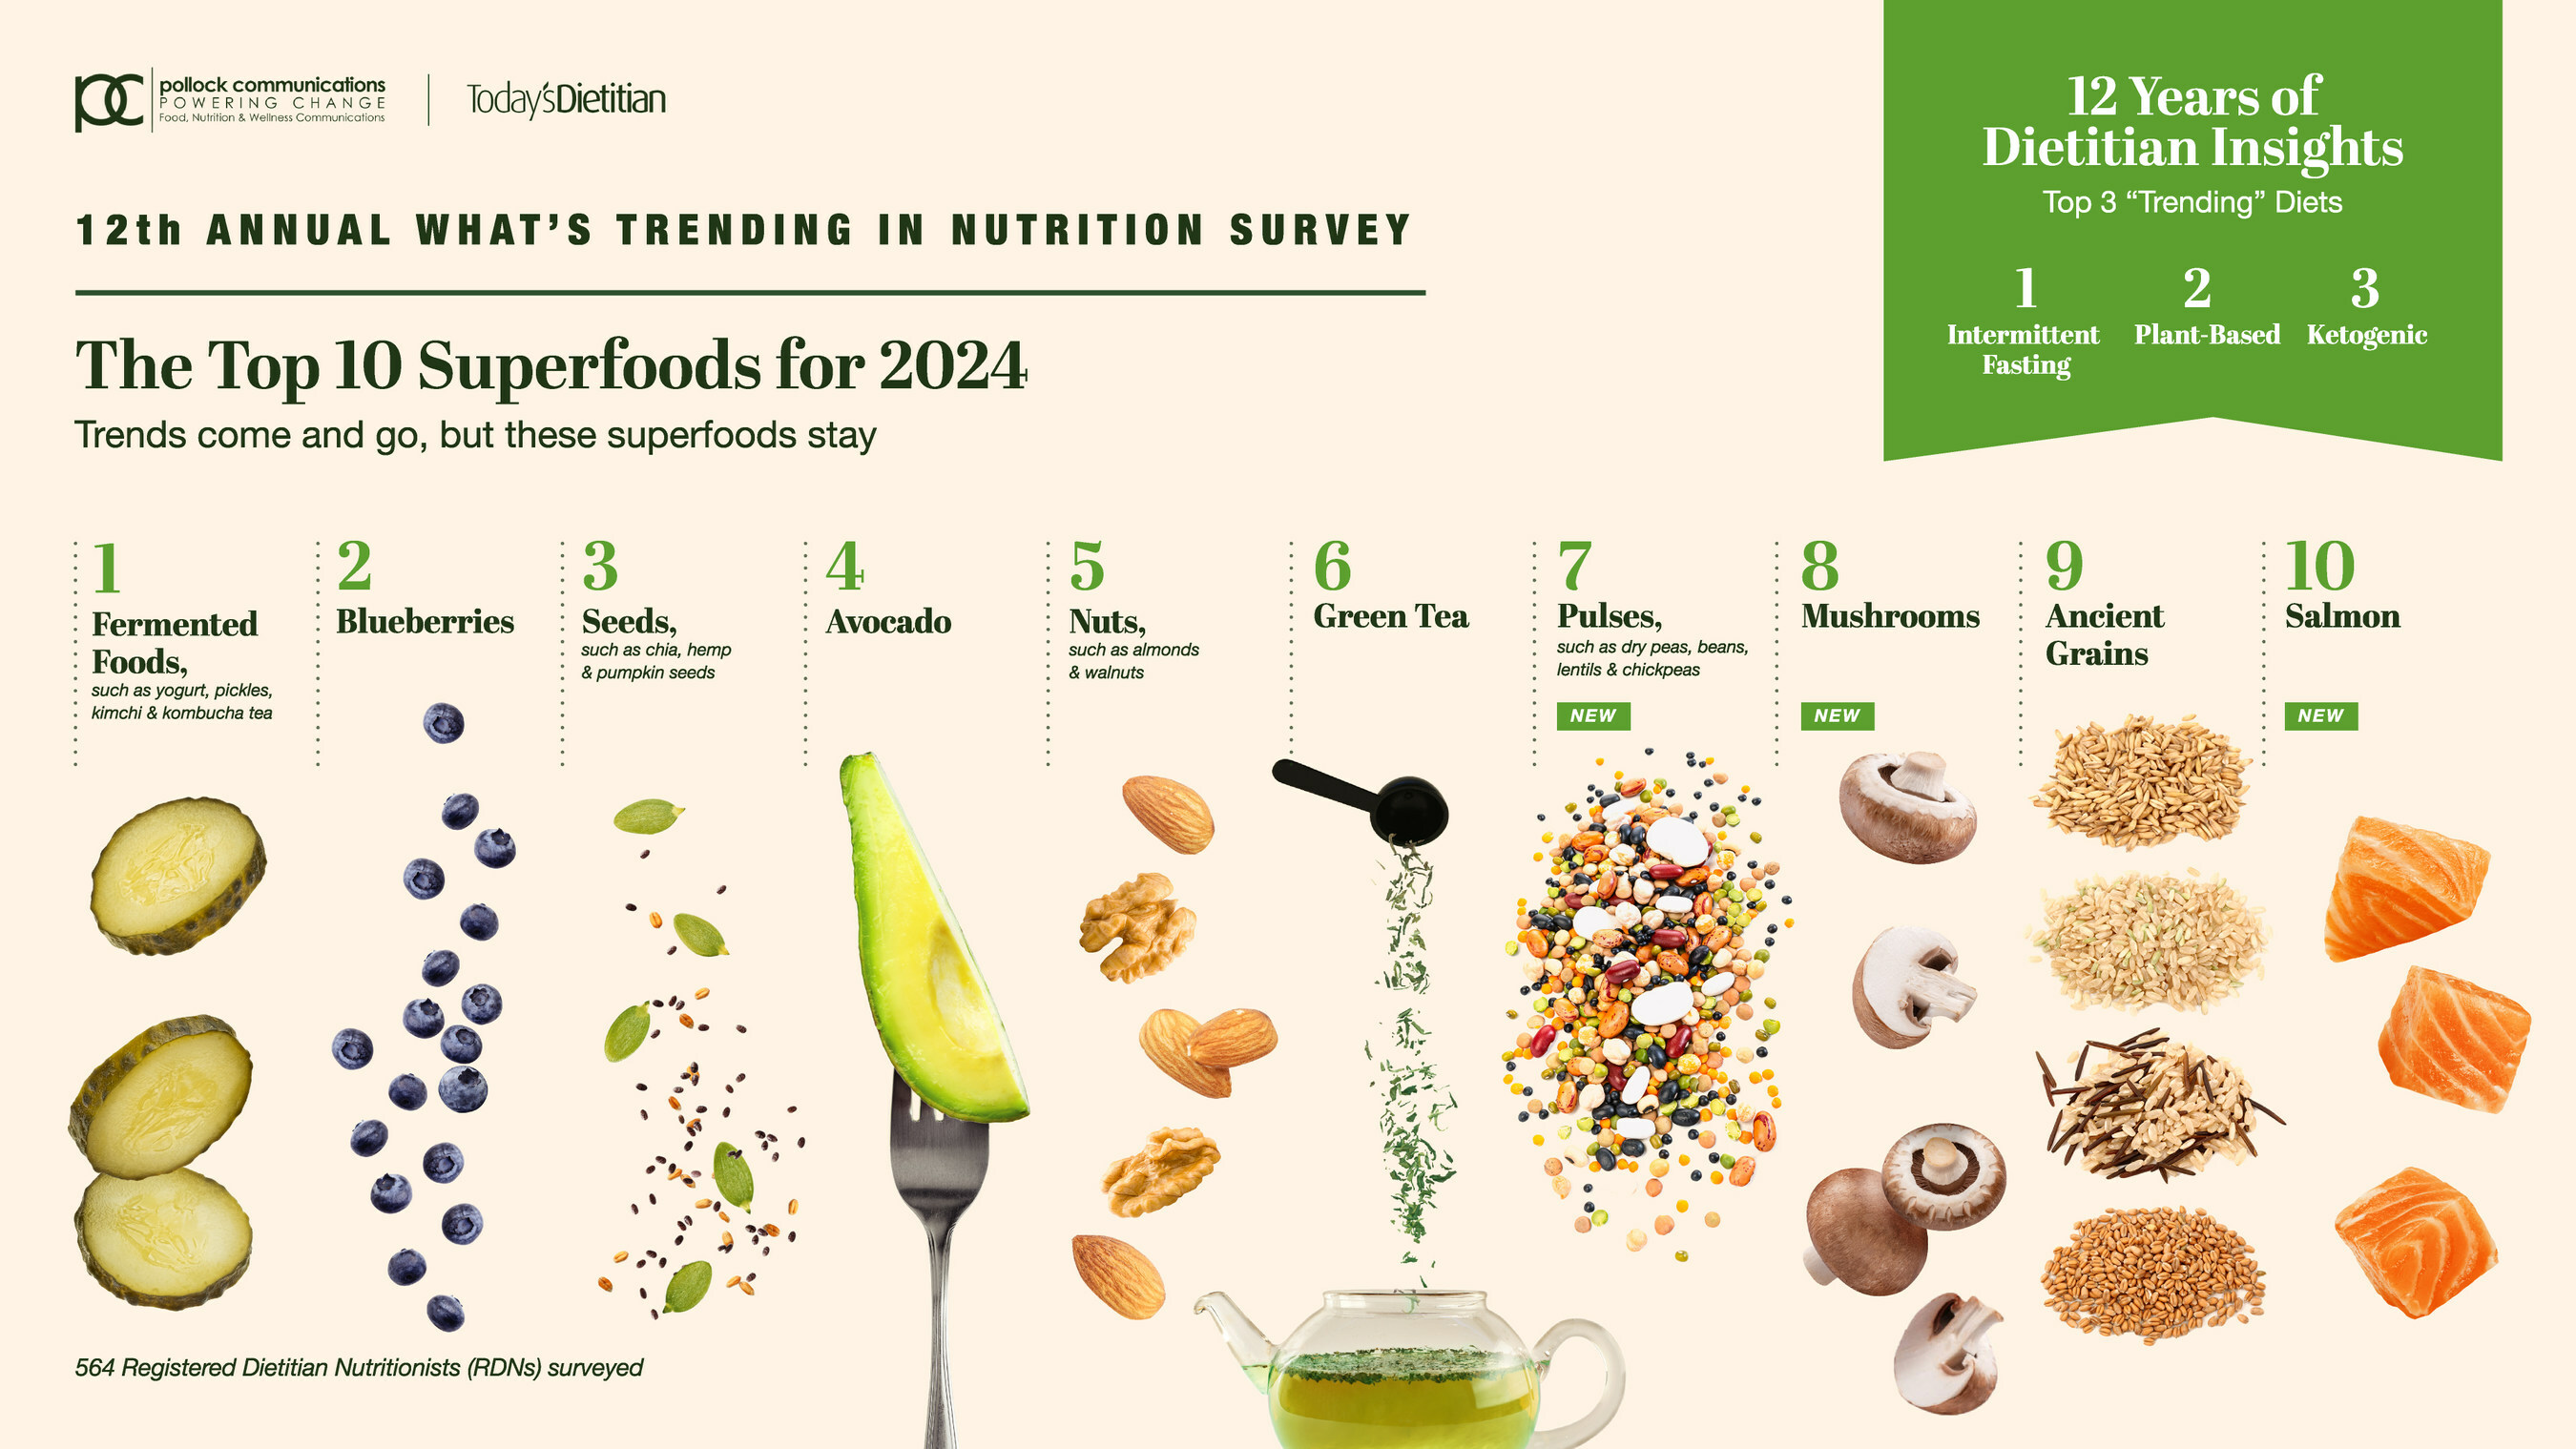 Top 10 Superfoods of 2024